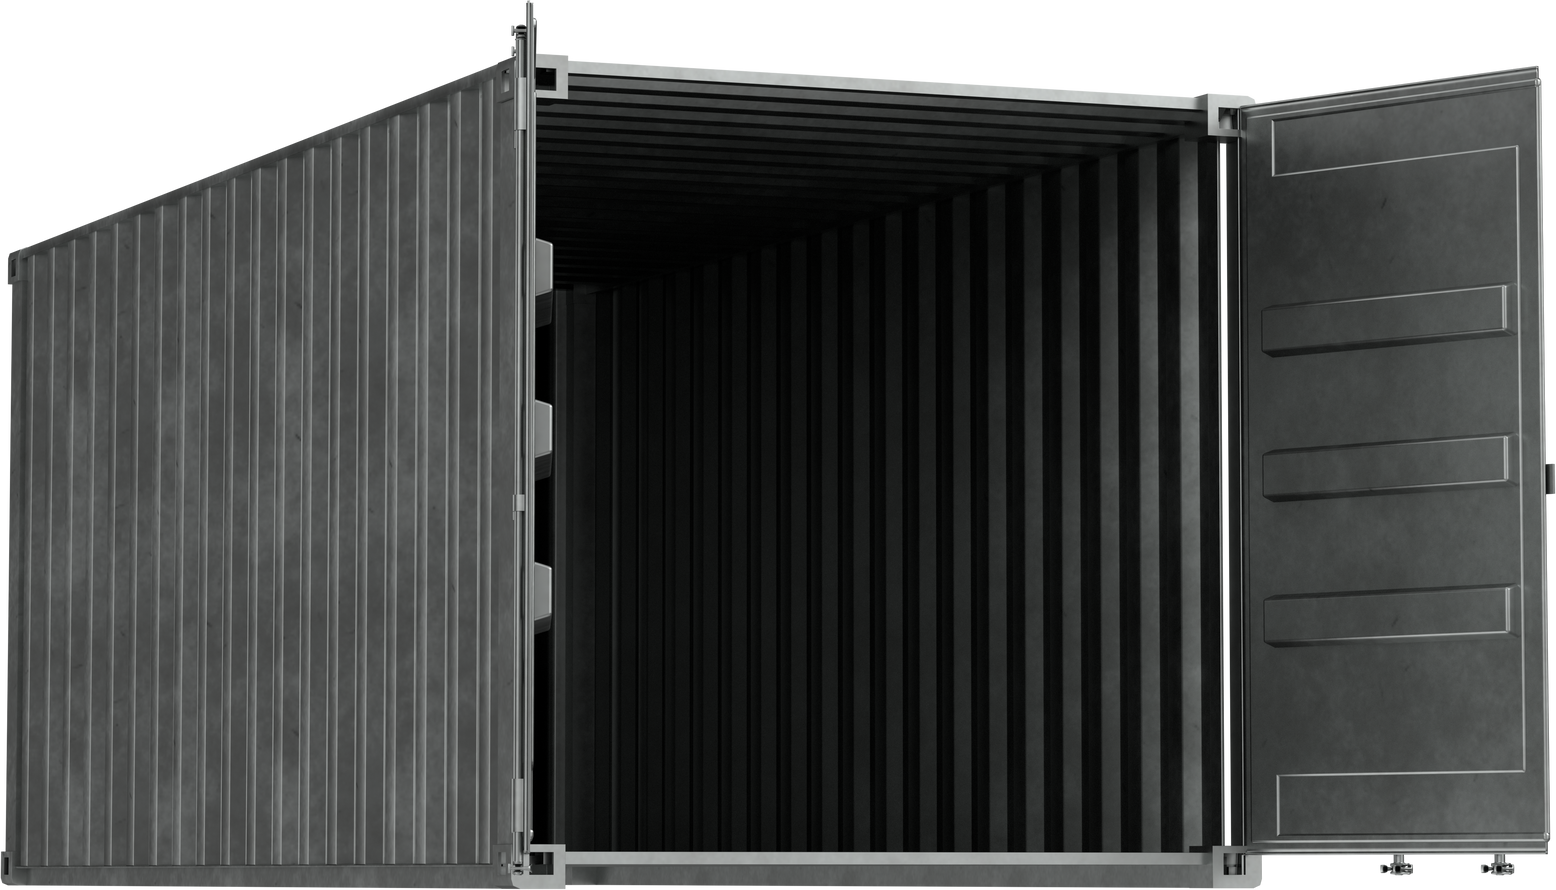 3D rendering illustration of a open shipping container